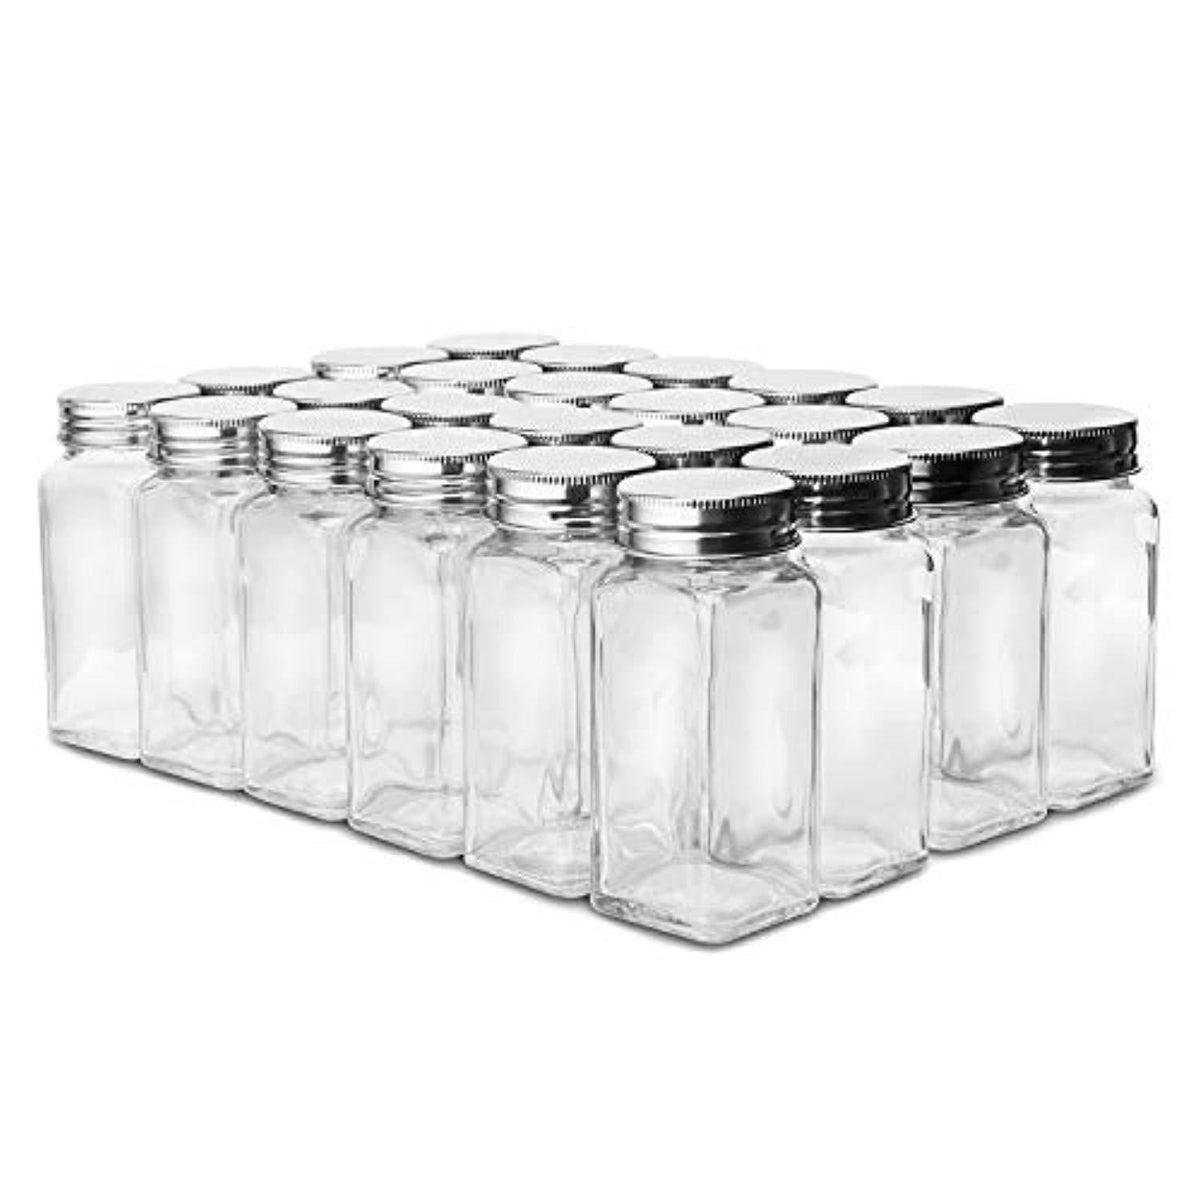 Aozita 24 Pcs Glass Spice Jars/Bottles - 4oz Empty Square Spice Containers  with 612 Spice Labels 